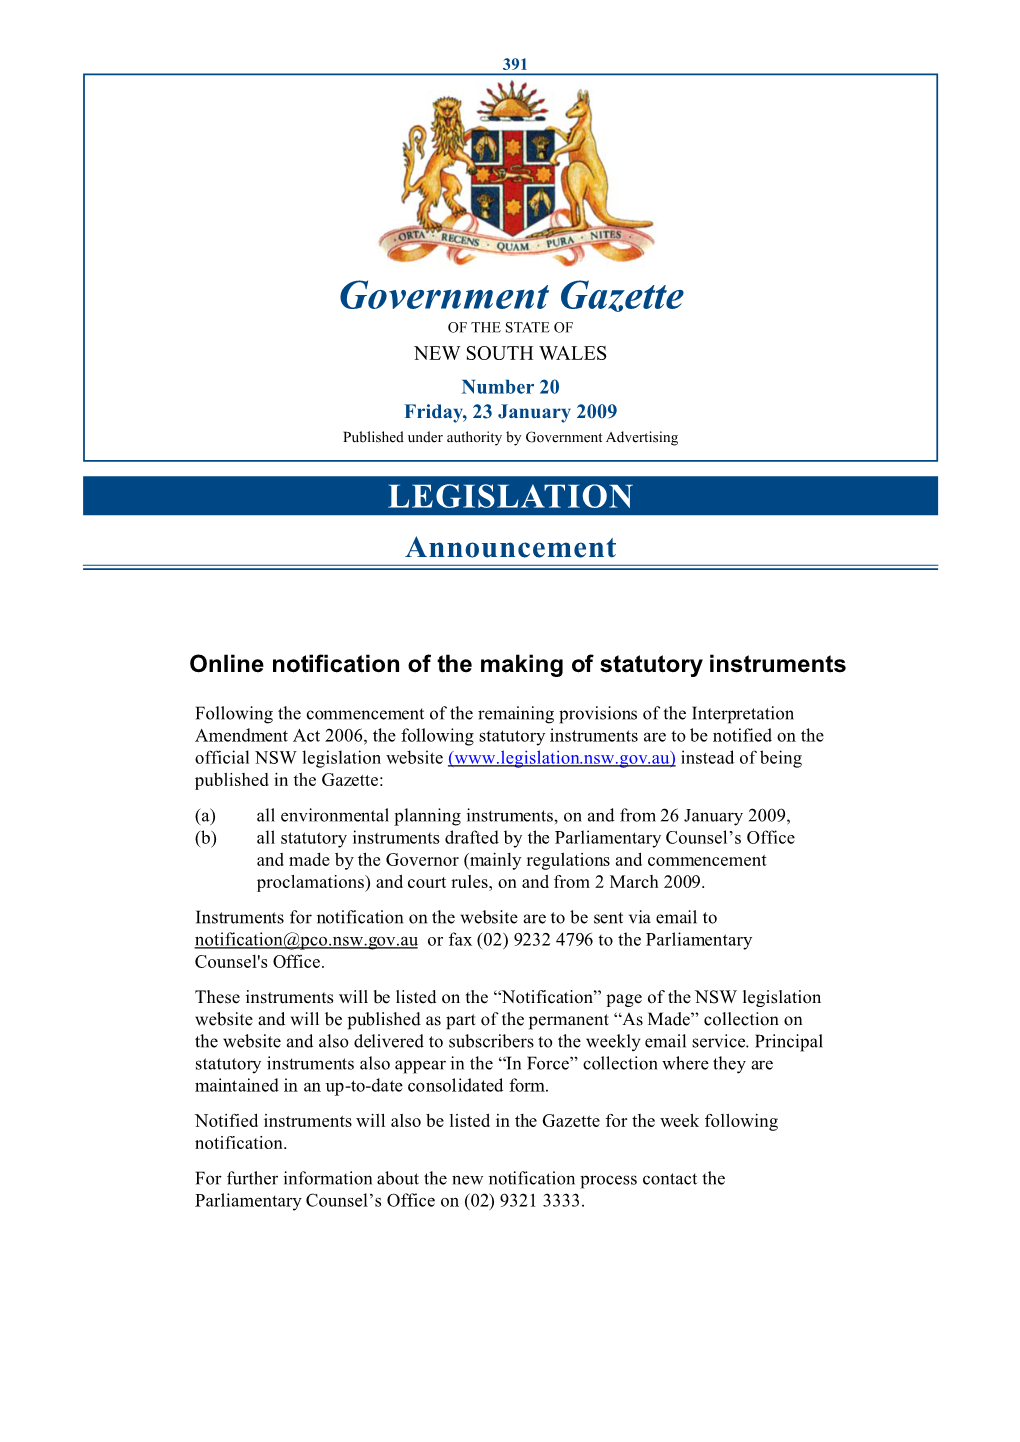 Government Gazette of the STATE of NEW SOUTH WALES Number 20 Friday, 23 January 2009 Published Under Authority by Government Advertising